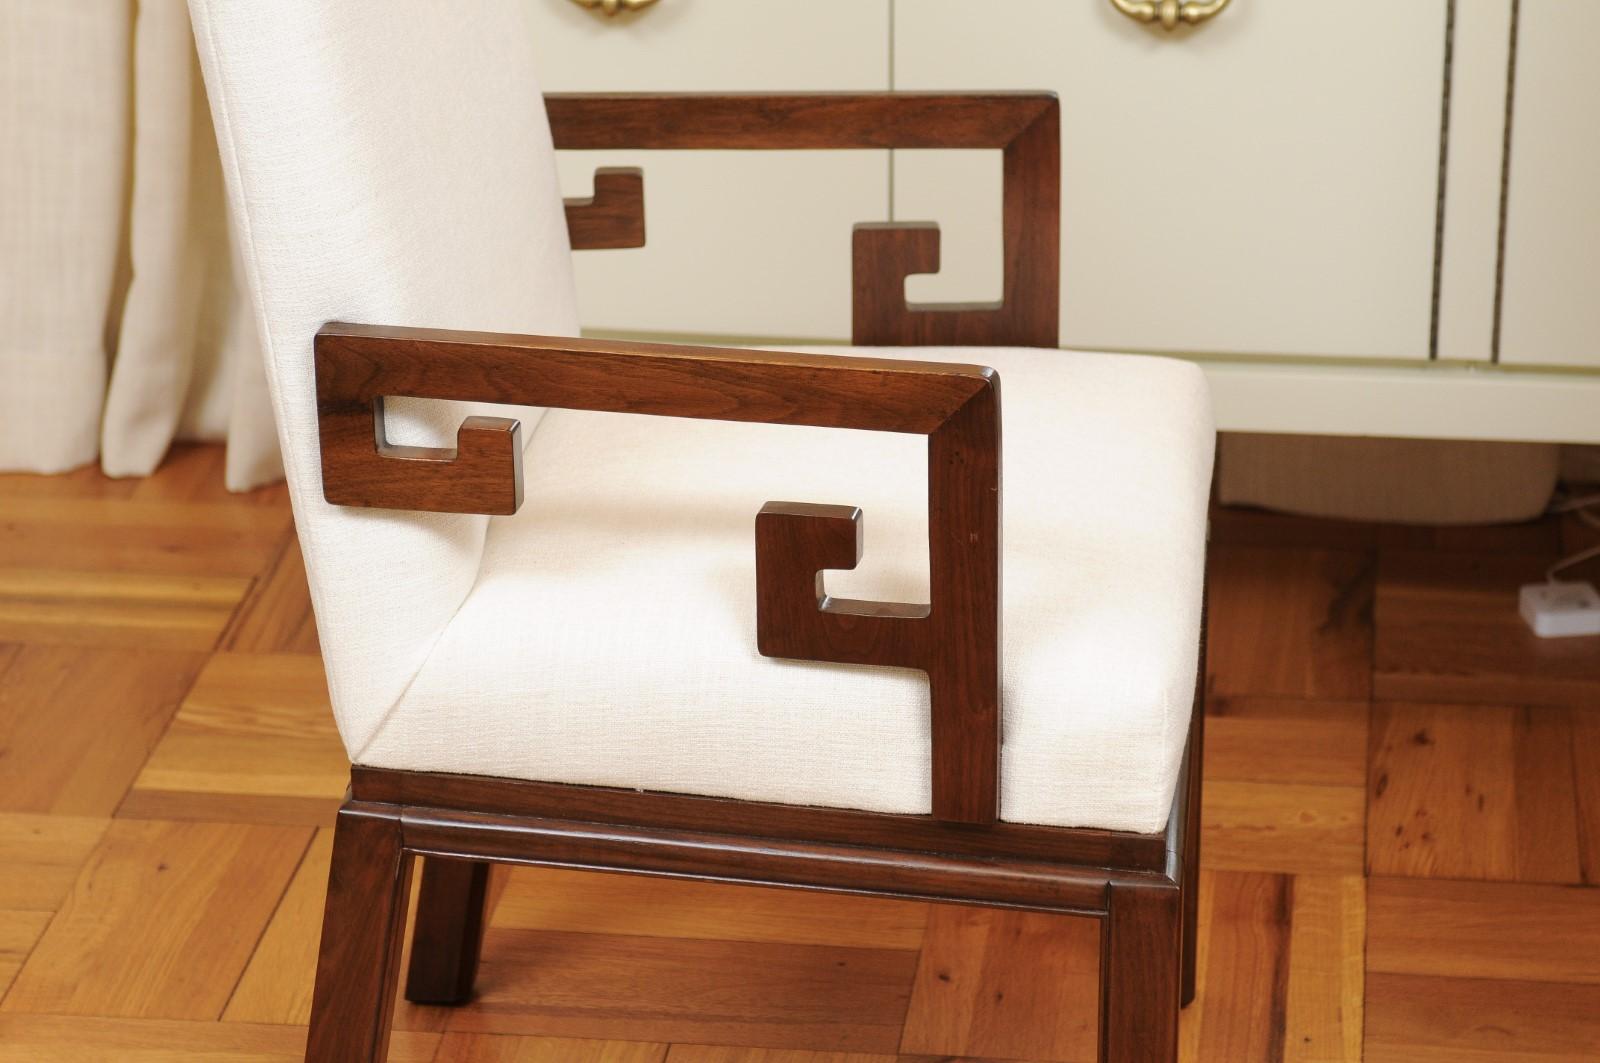 All Arms, Sublime Set of 12 Greek Key Chairs by Michael Taylor, circa 1970 For Sale 5